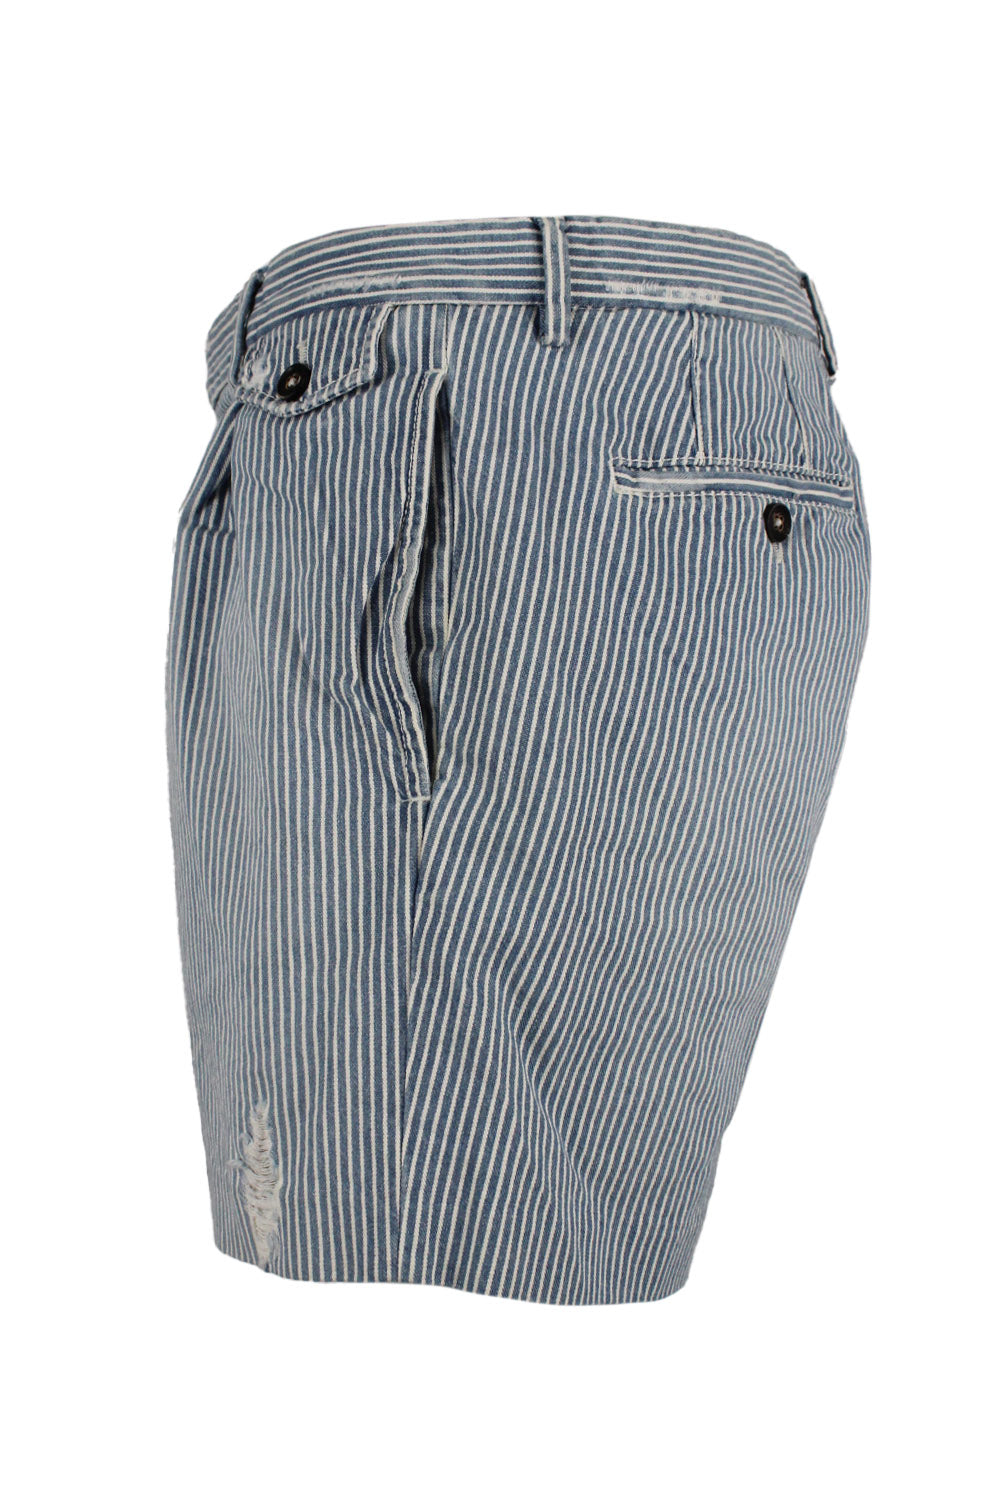 side angle striped denim shorts featuring  small flap pocket at left hip, side pockets, and rear jetted pockets.